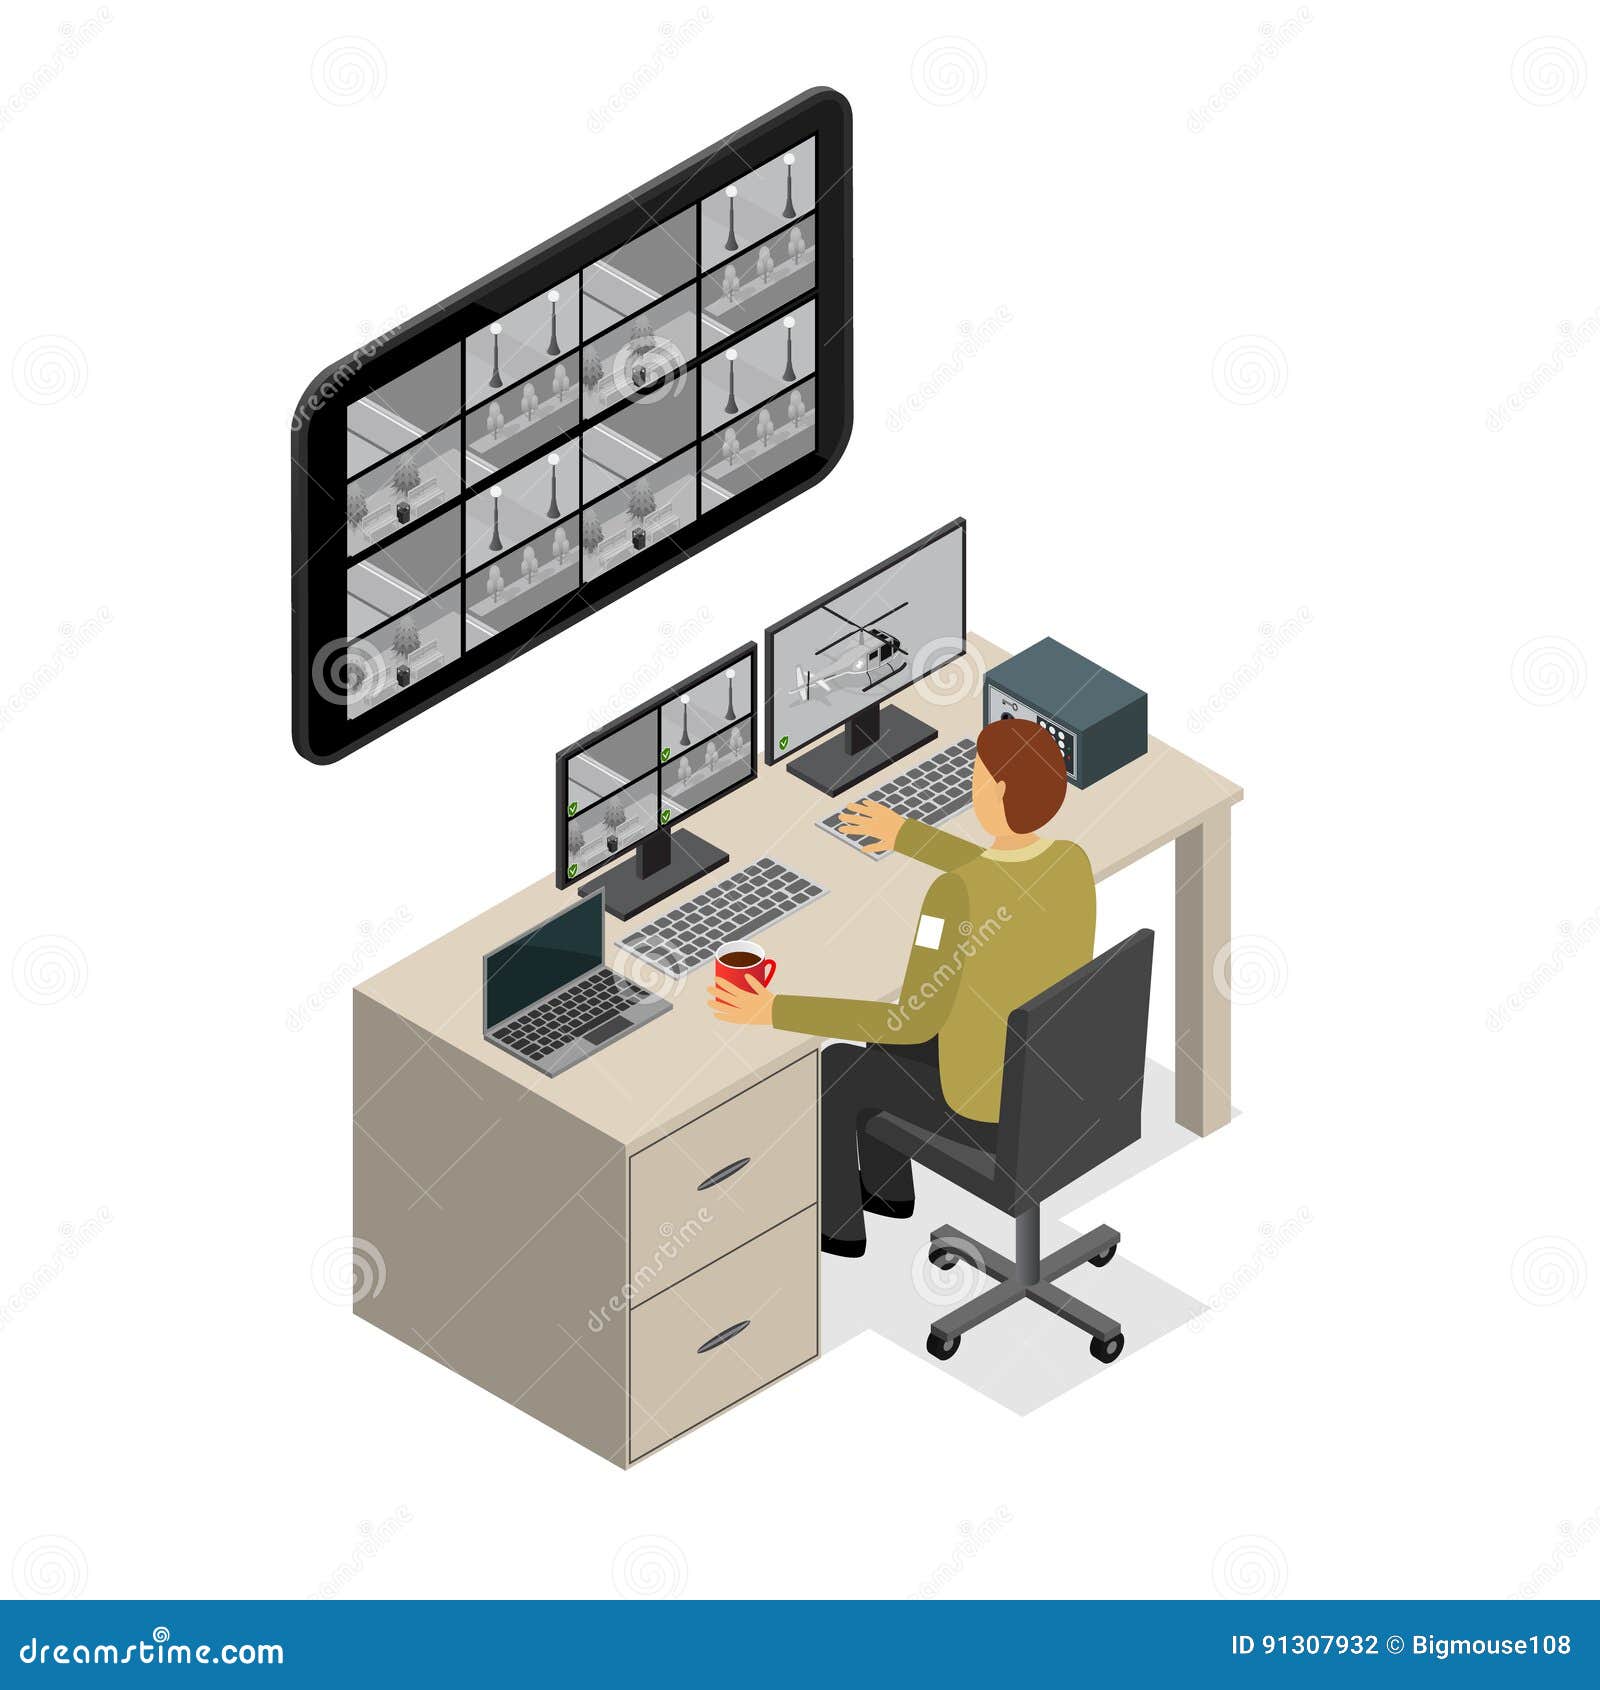 security guard monitoring service isometric view. 